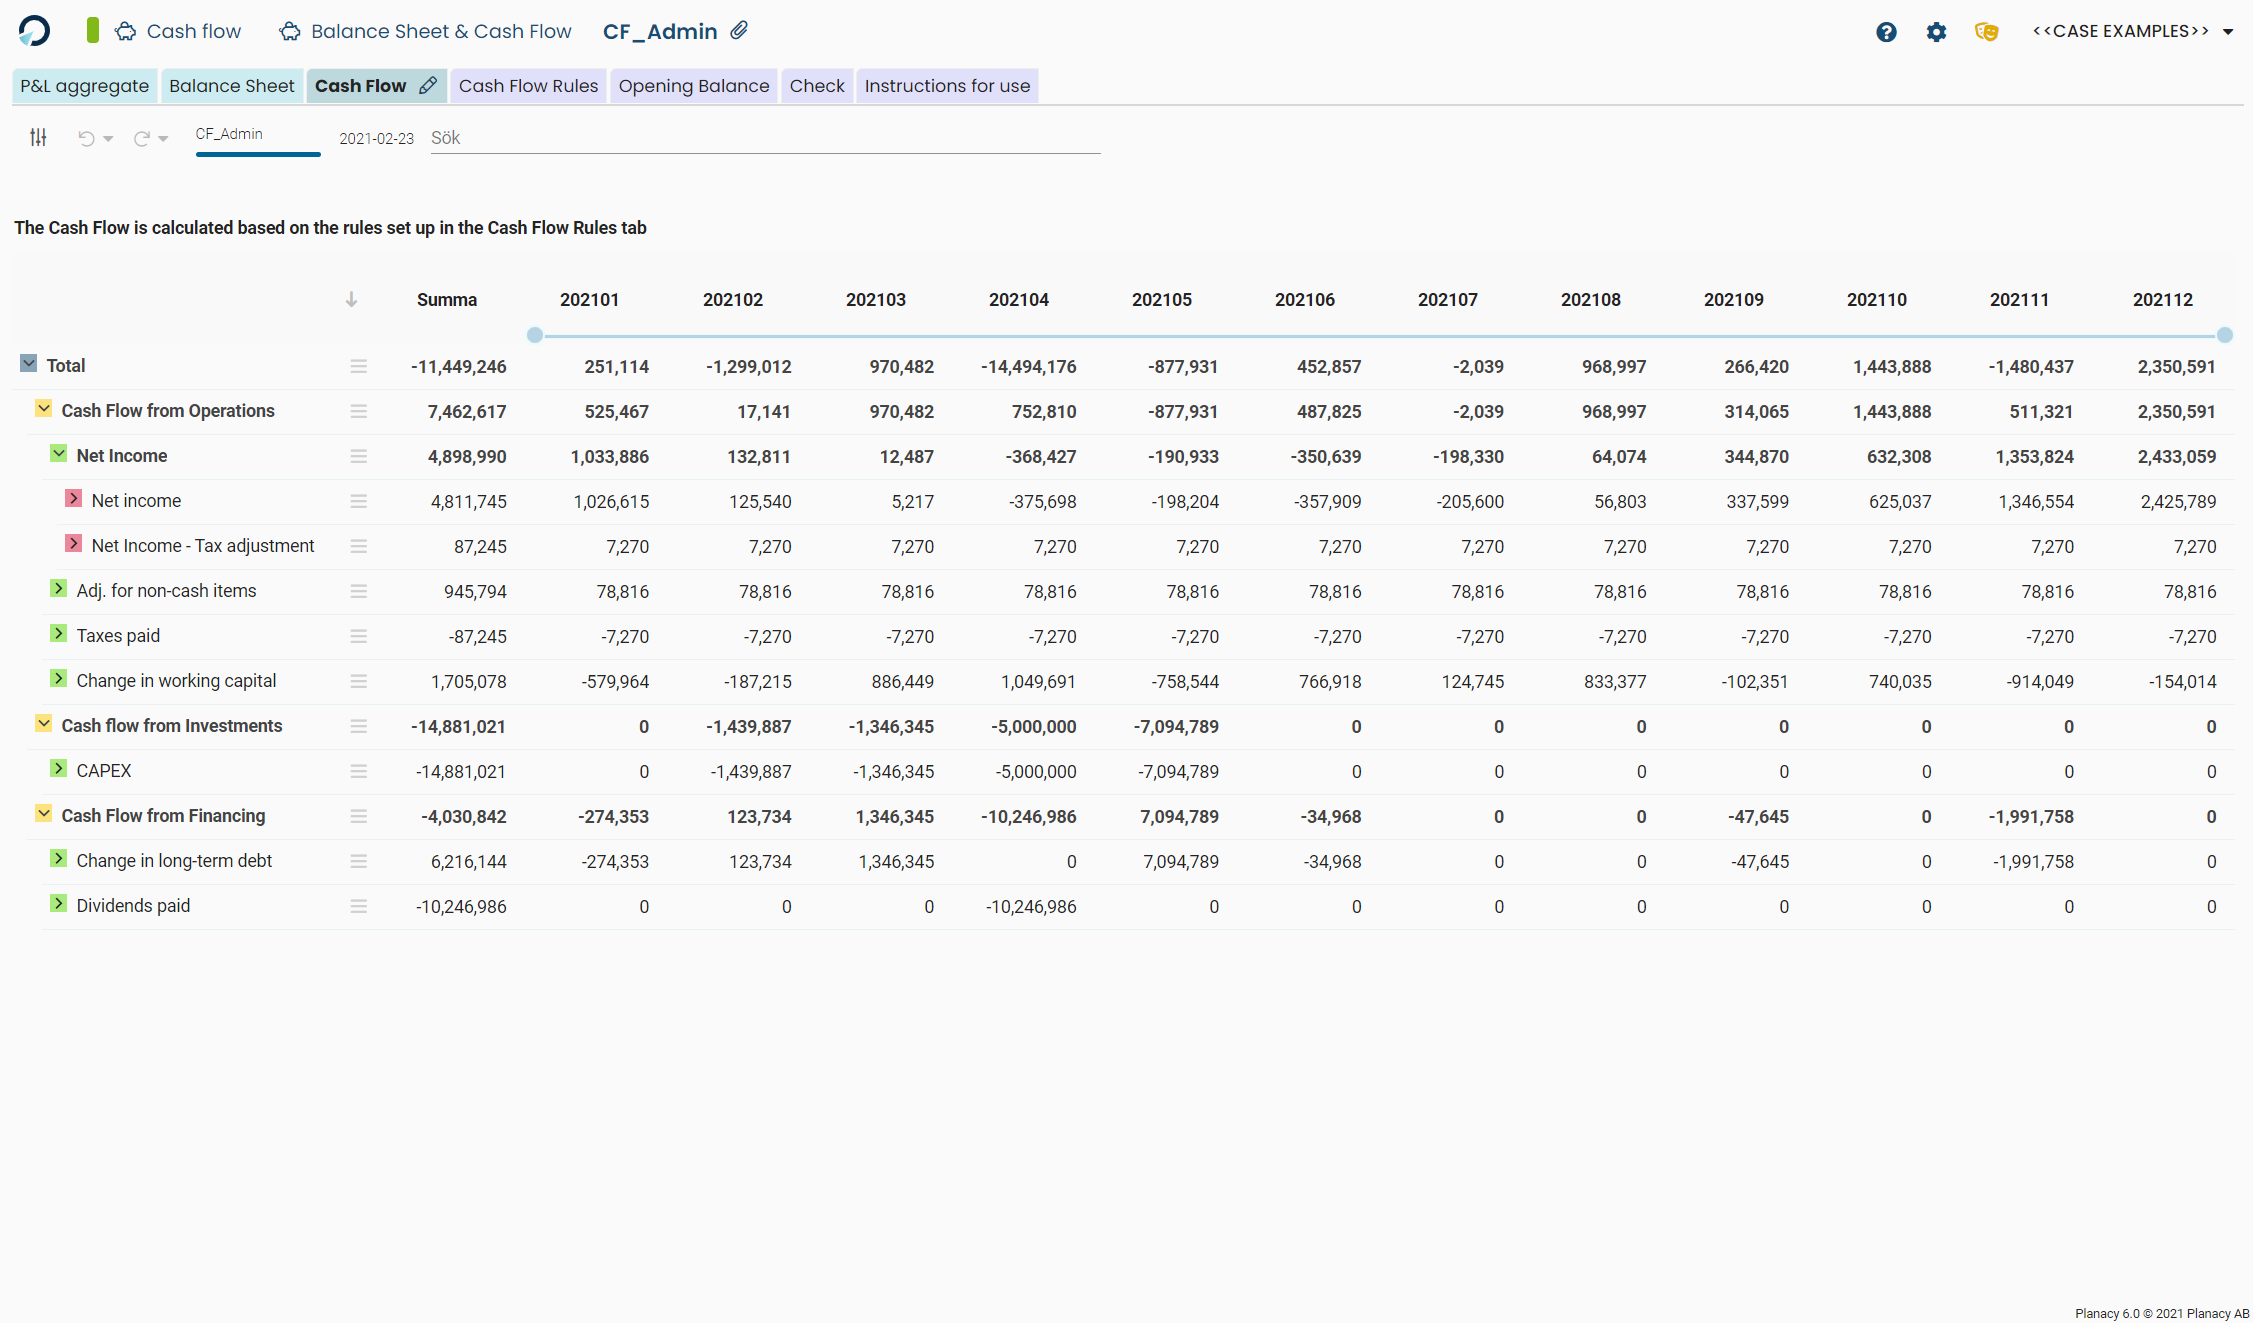 Cash flow overview based on forecasted income statement and balance sheet